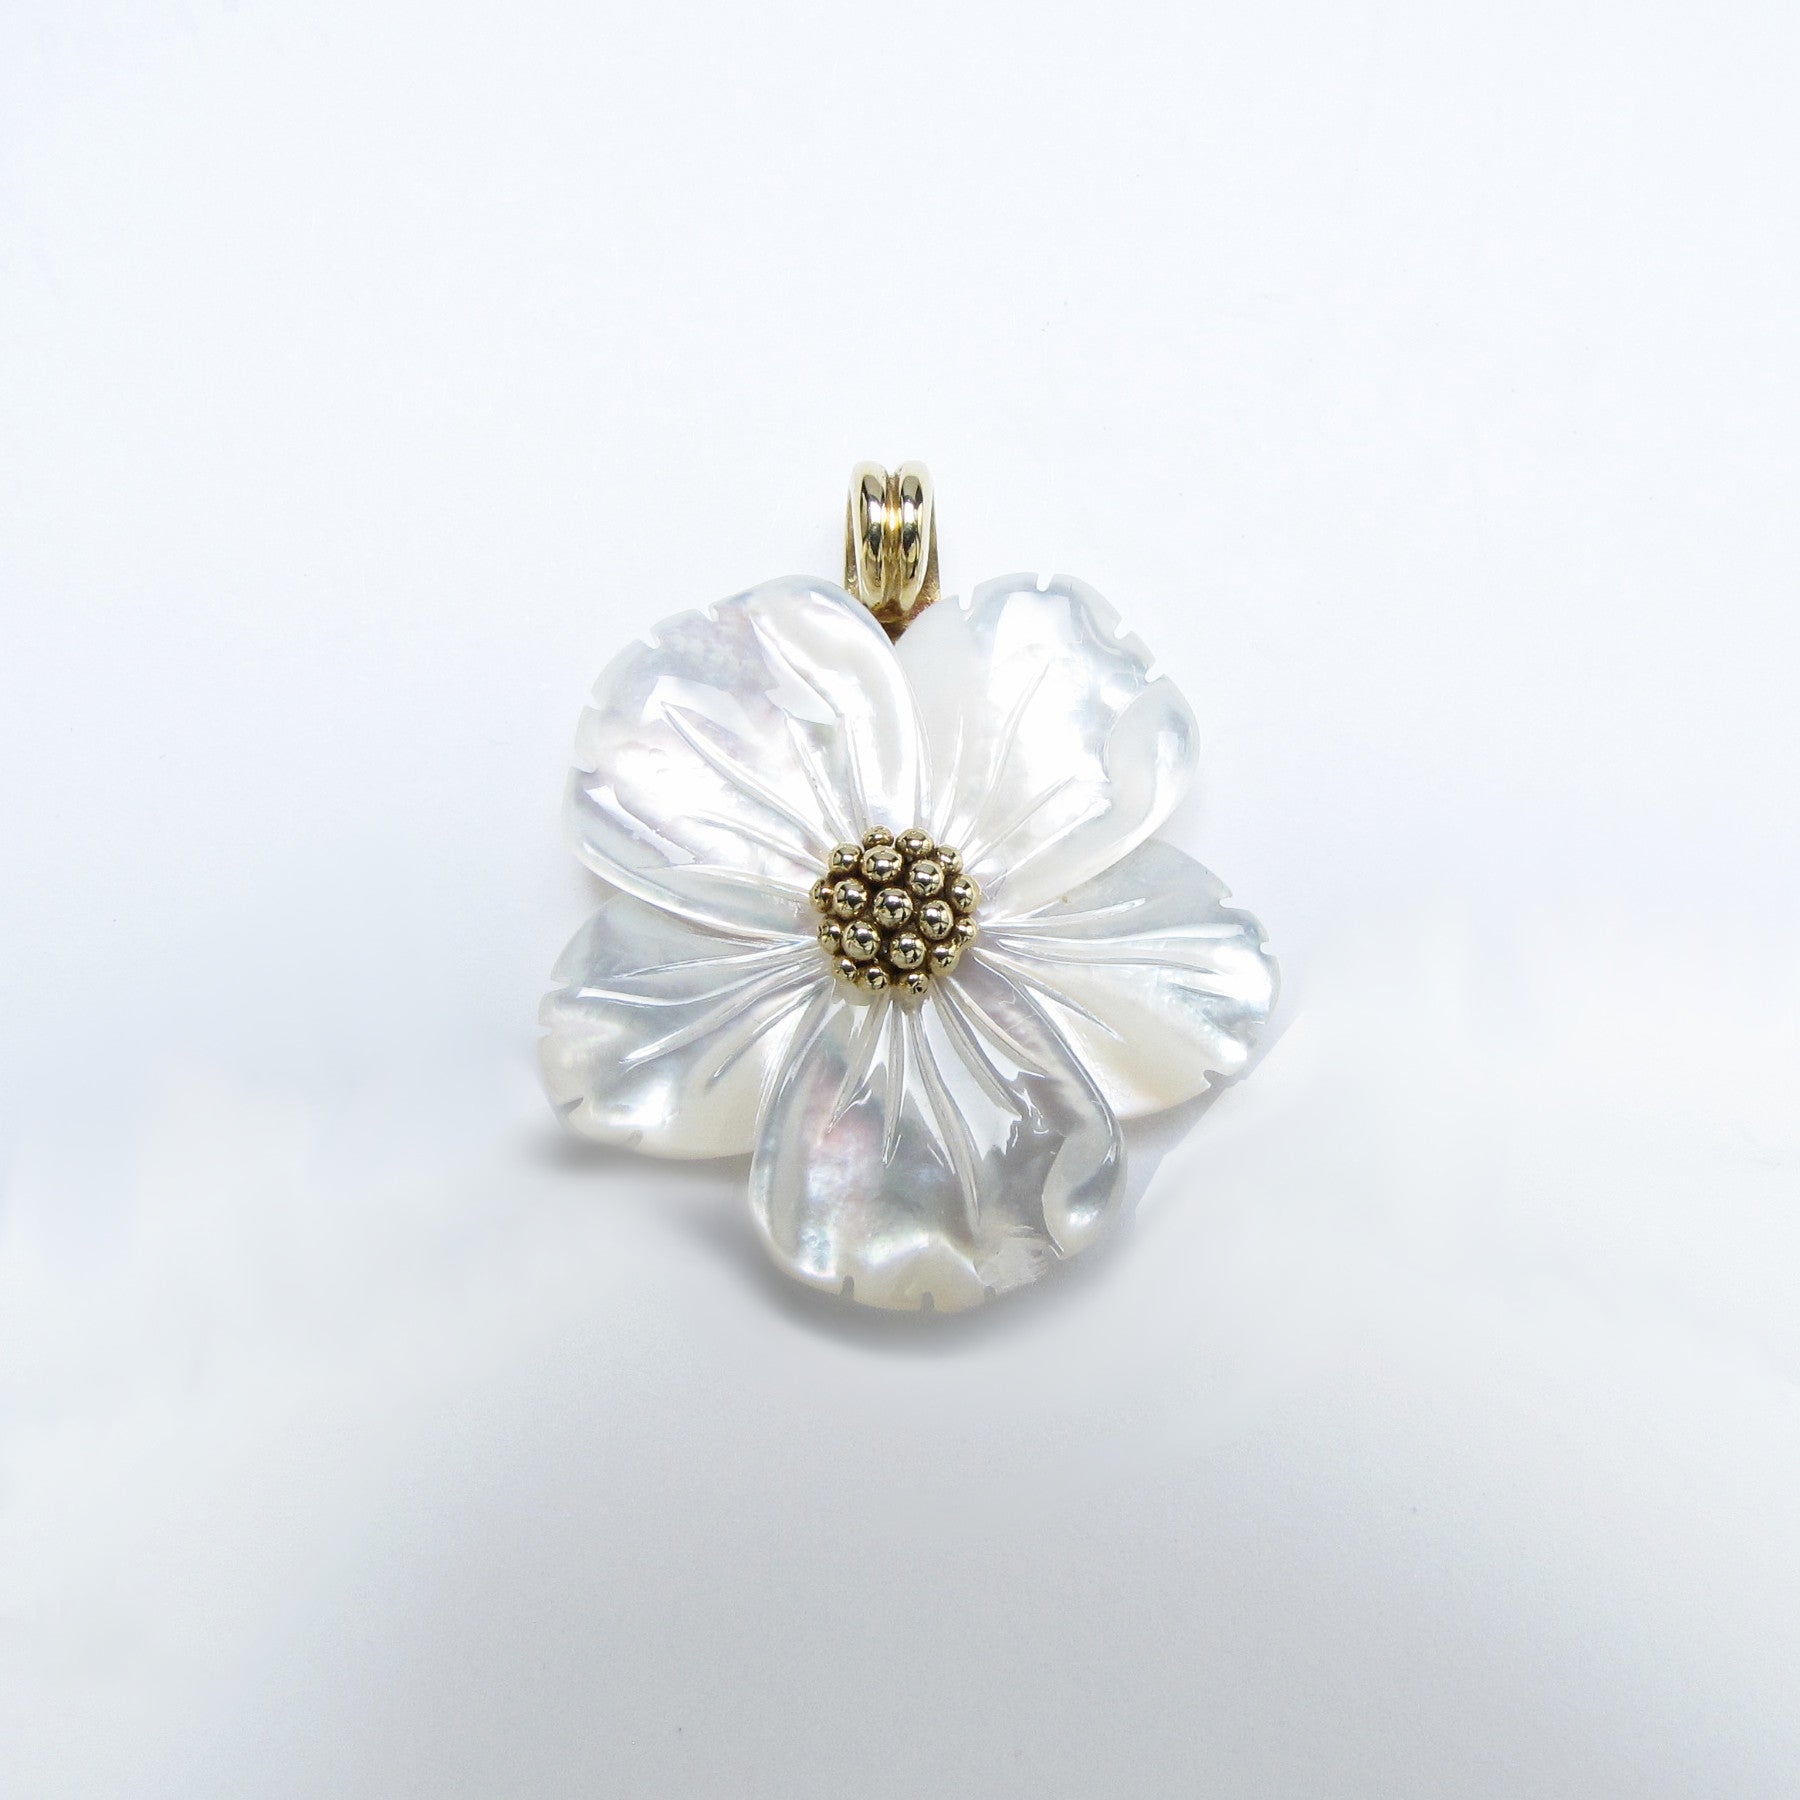 white mother of pearl flower pendant, 18 K yellow gold, weight about 4,3 g. (0,15 oz), diameter 28 mm max